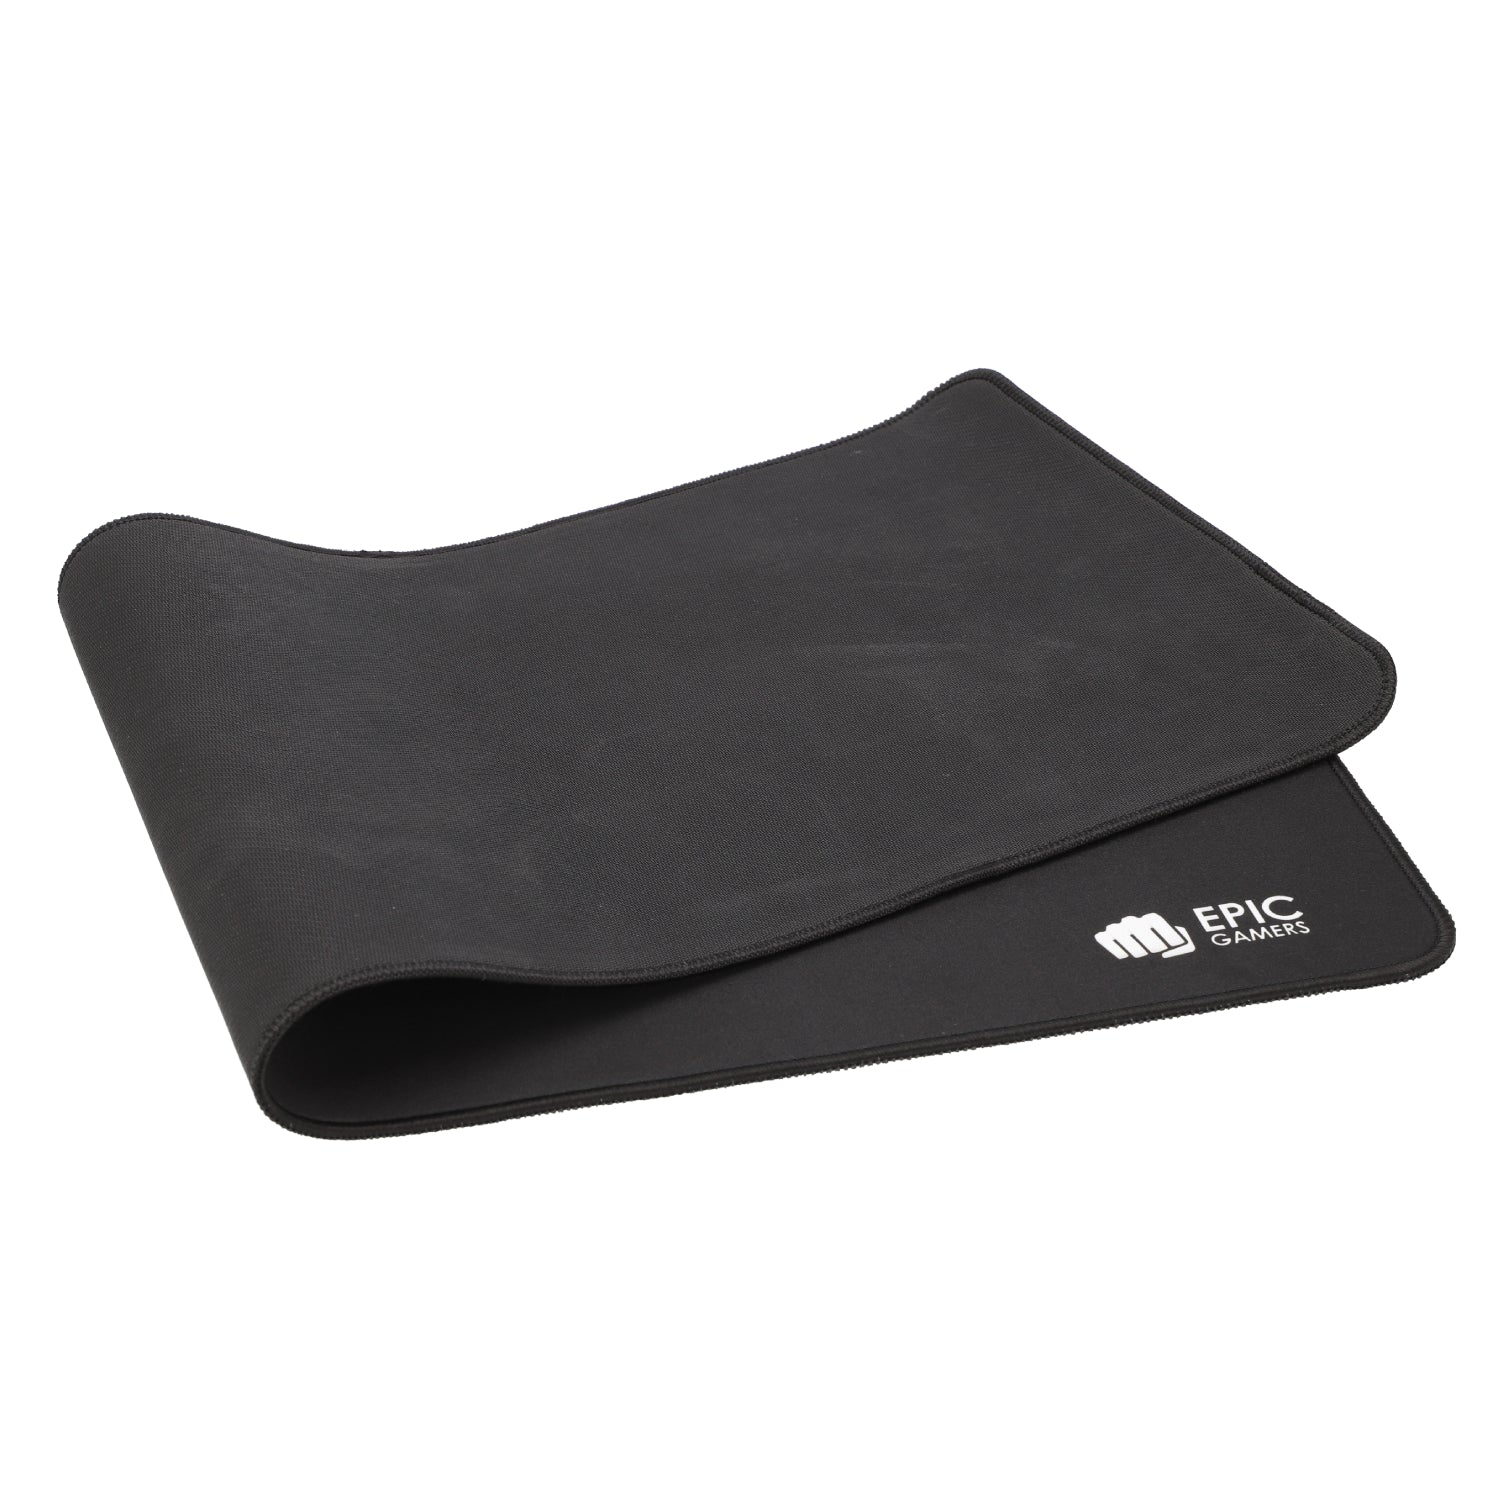 Epic Gamers Gaming Mouse Pad - Black - Store 974 | ستور ٩٧٤